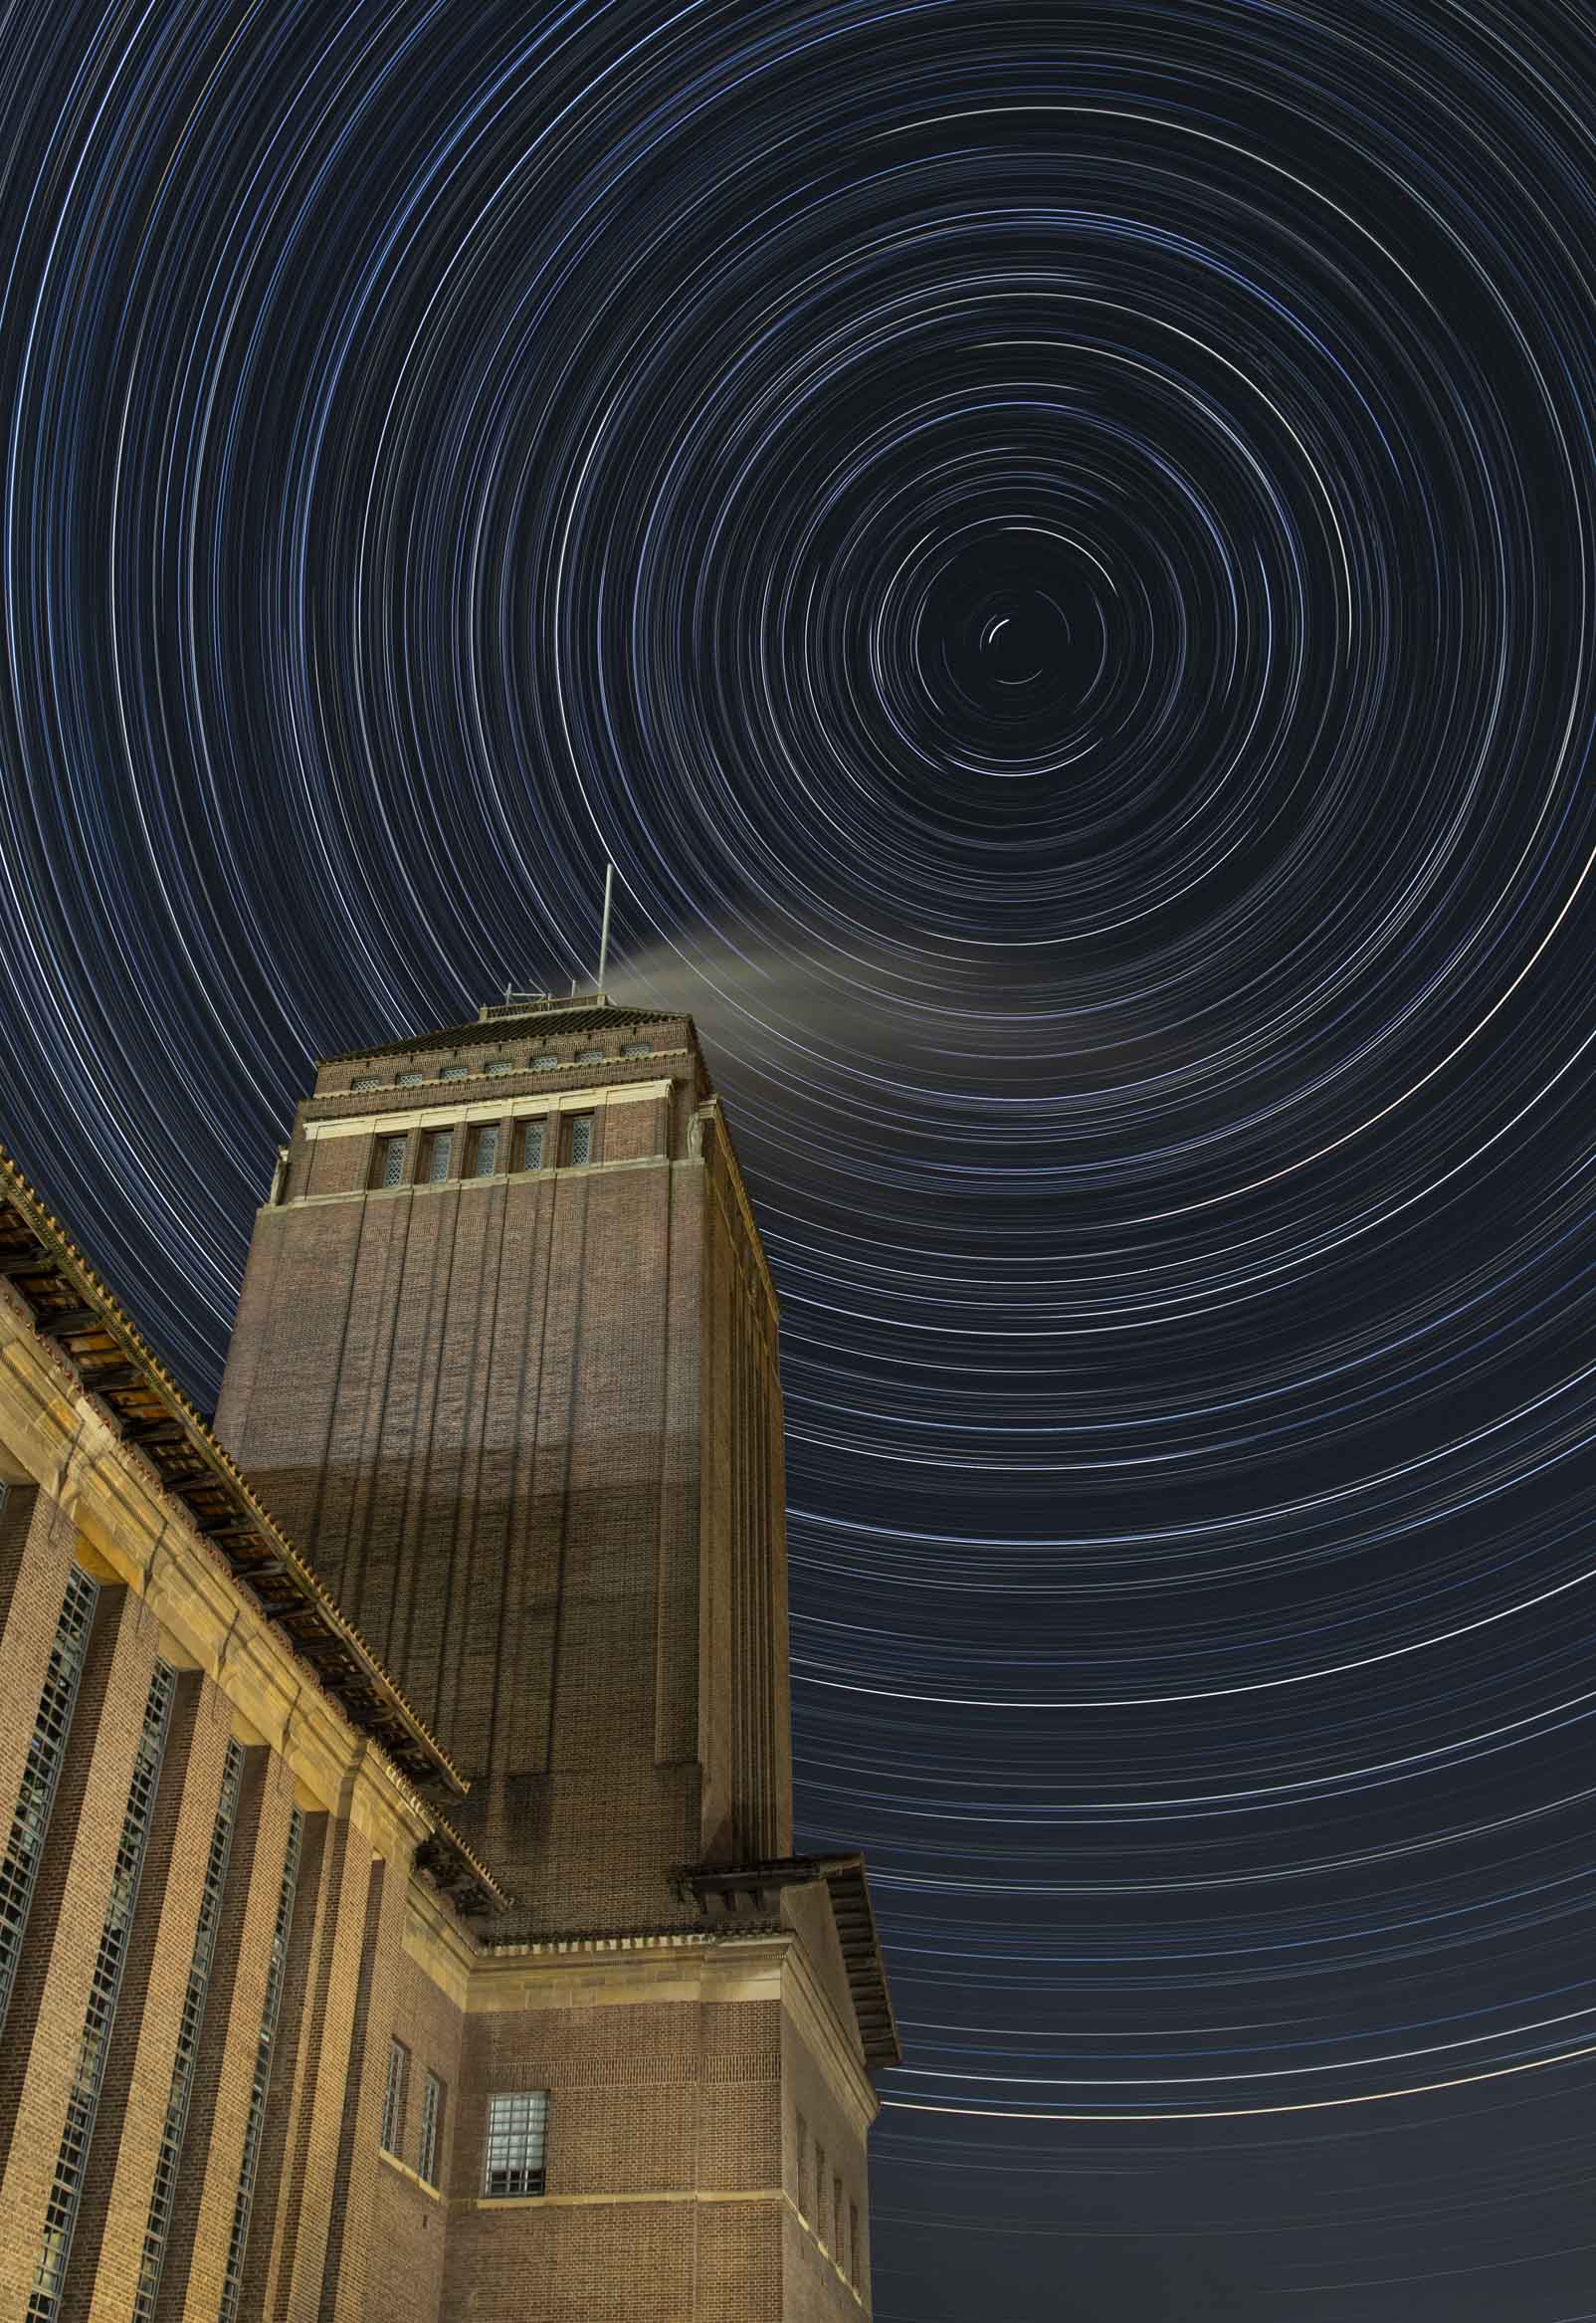 My second star trail photo - this time I wanted one containing concentric circles around the North star. The Cambridge University library looked a promising compisition, with the main tower just about fitting into frame with the north star. I sat outside for five hours, from 7pm to 12am, before the cold (around minus 4 that night in January 2023) become too much to bear and I headed home.